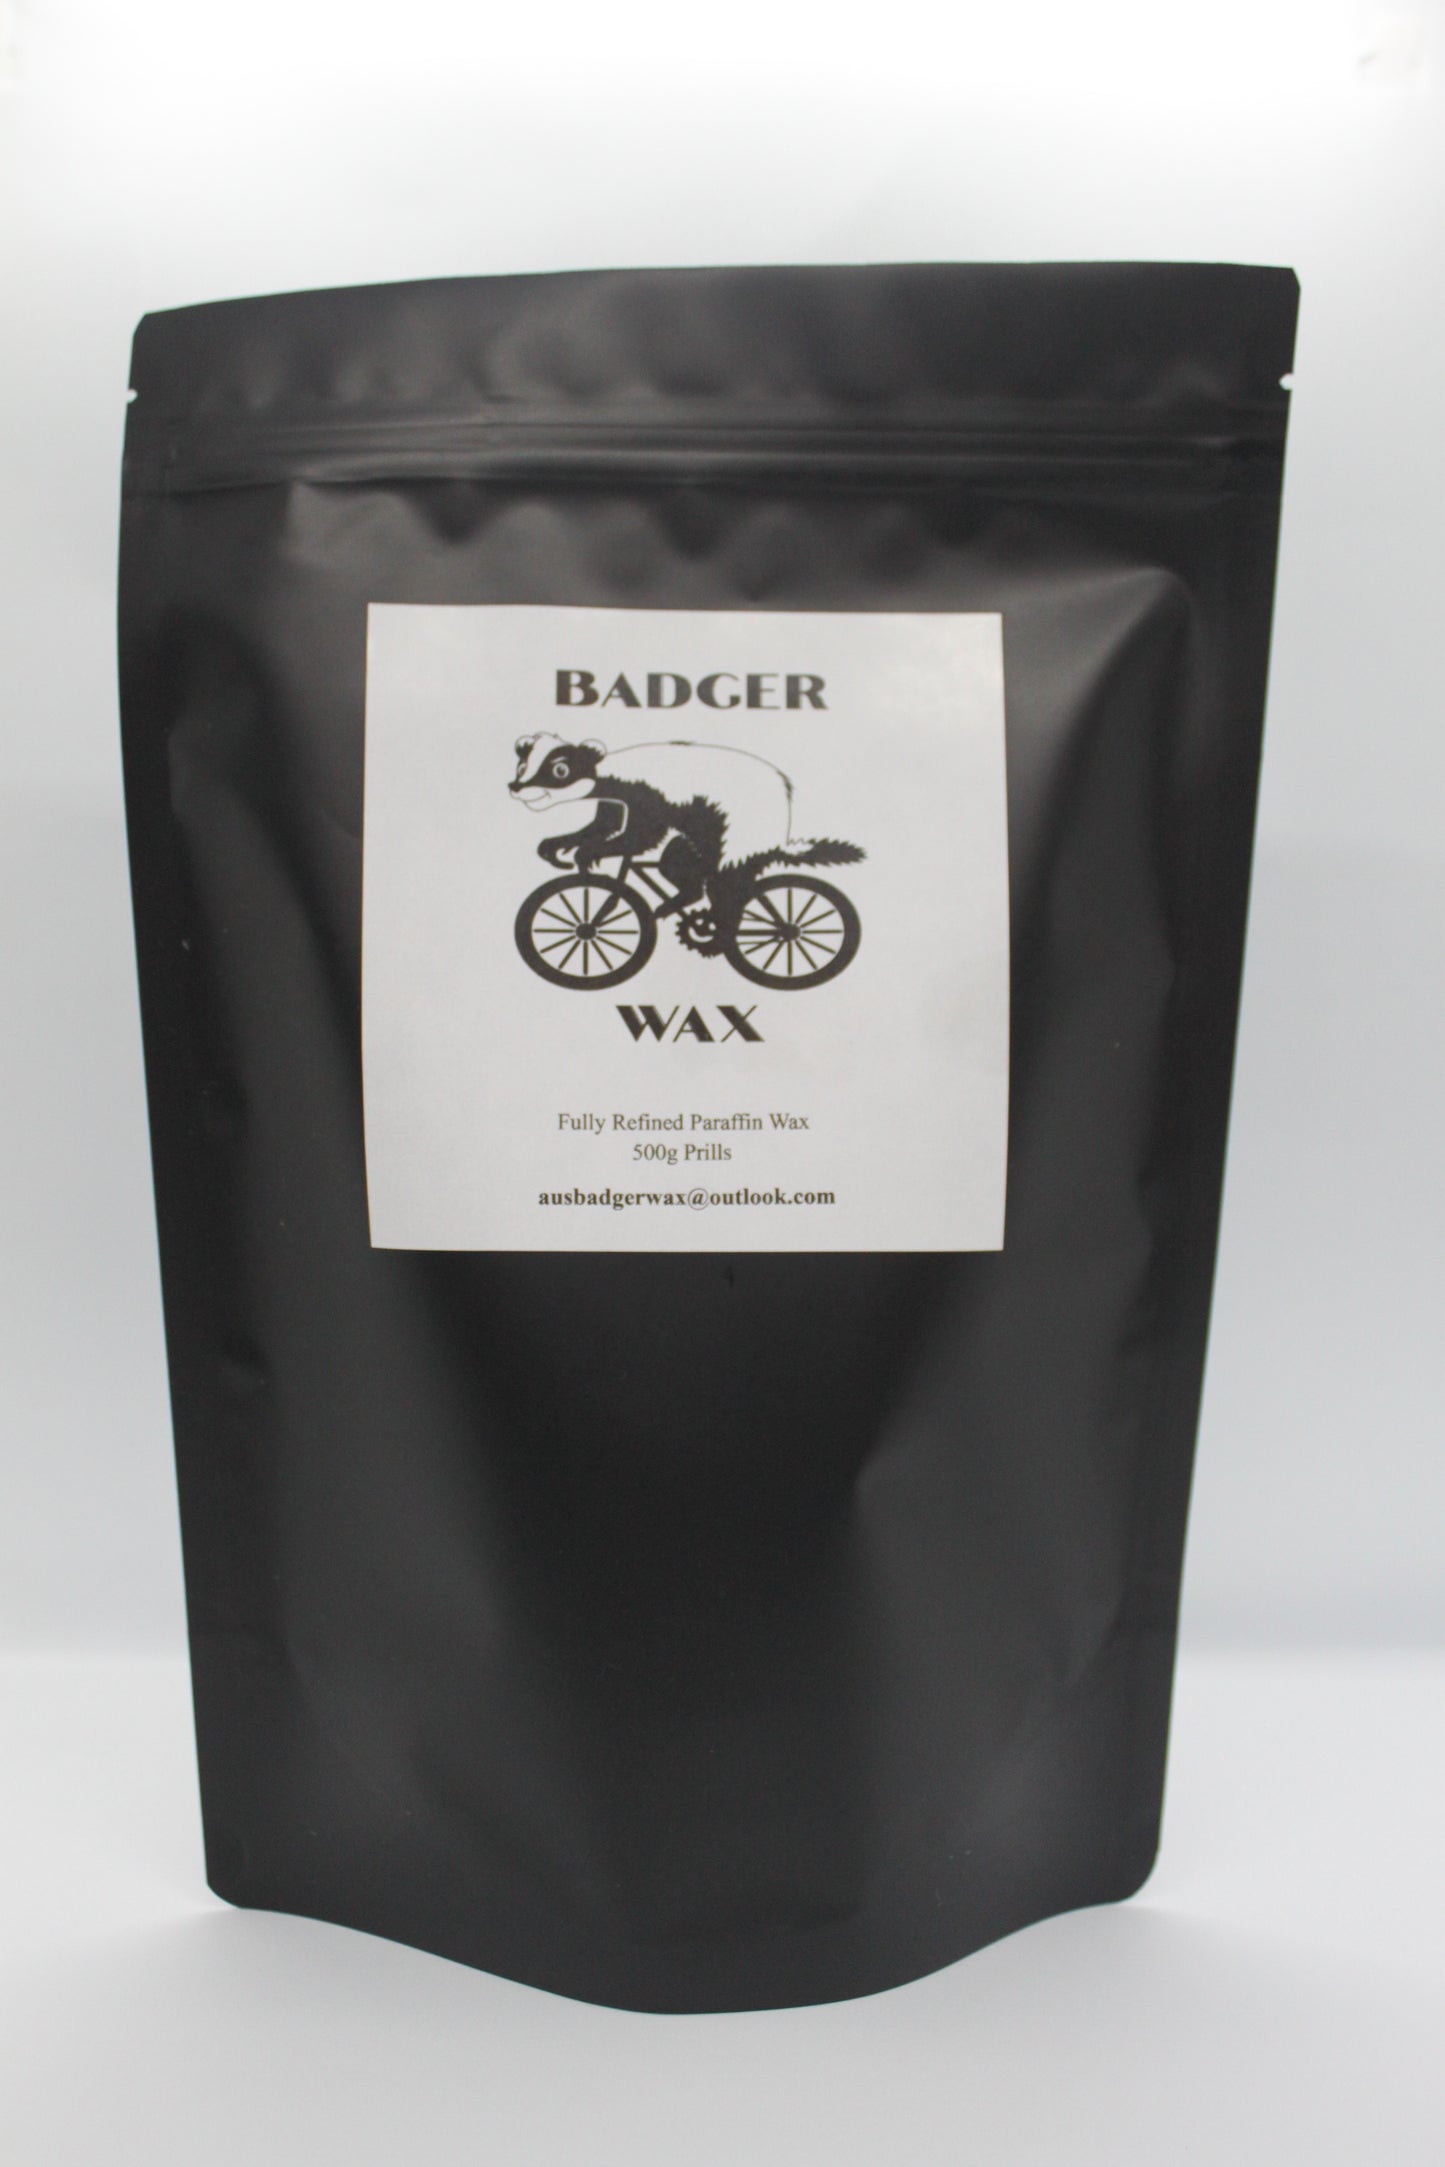 Fully refined paraffin wax, 500g - Badger Wax